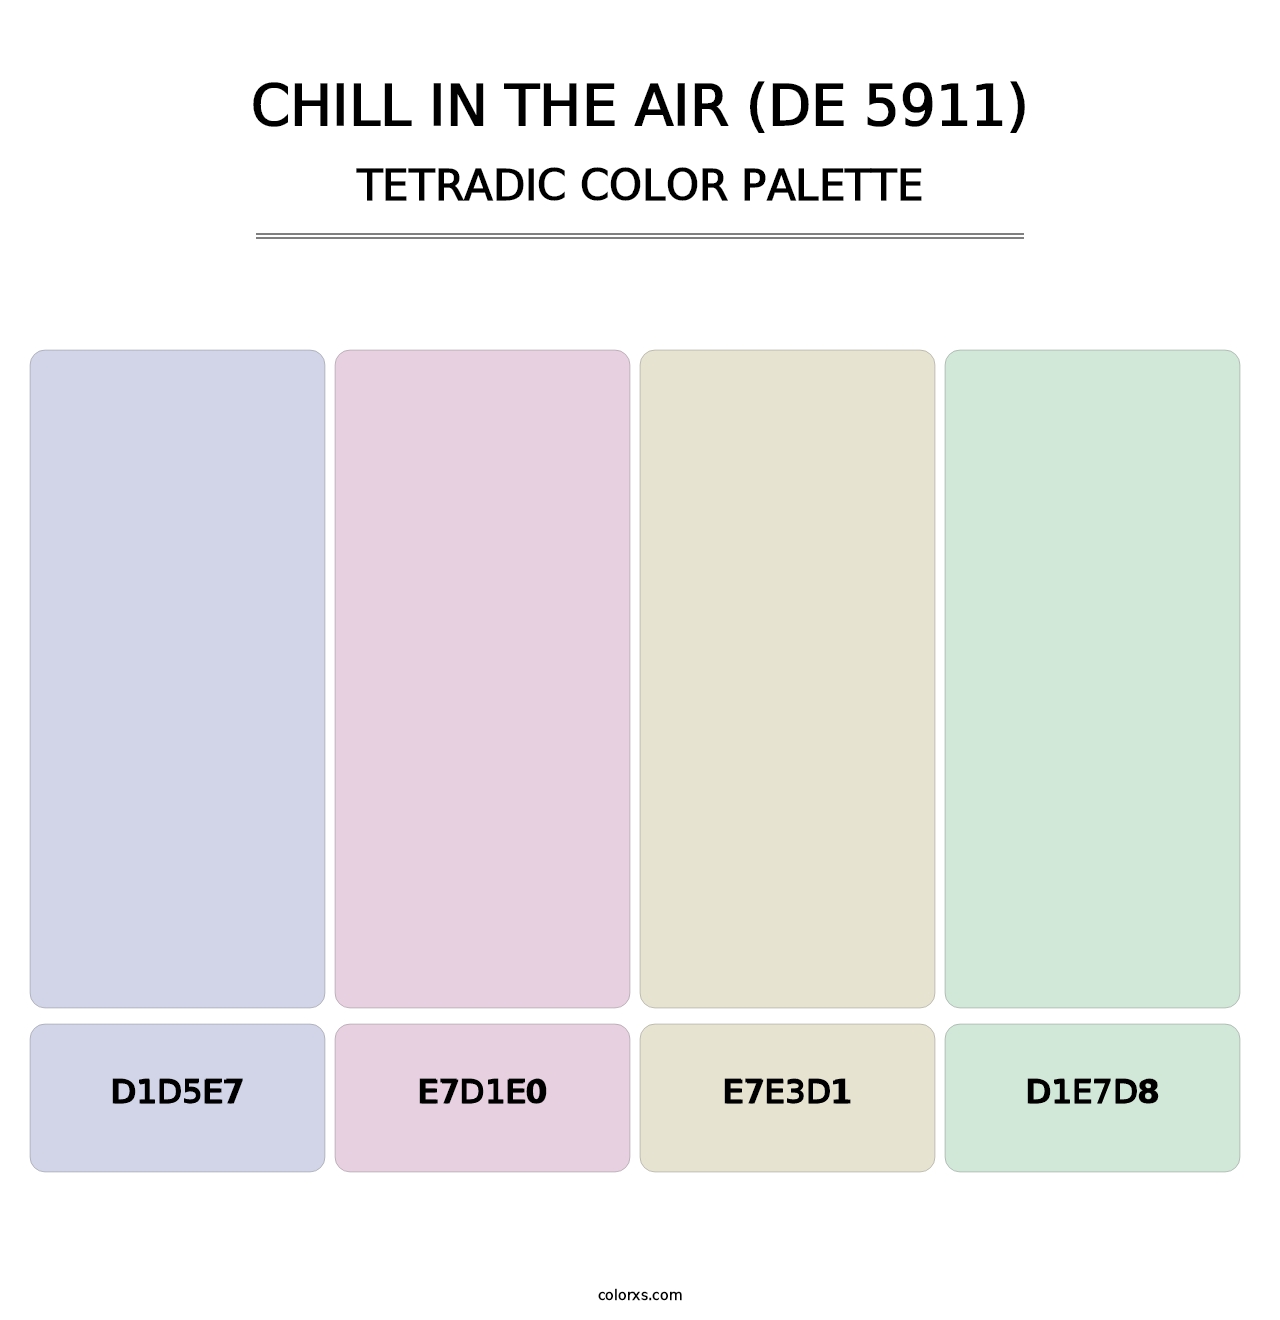 Chill in the Air (DE 5911) - Tetradic Color Palette